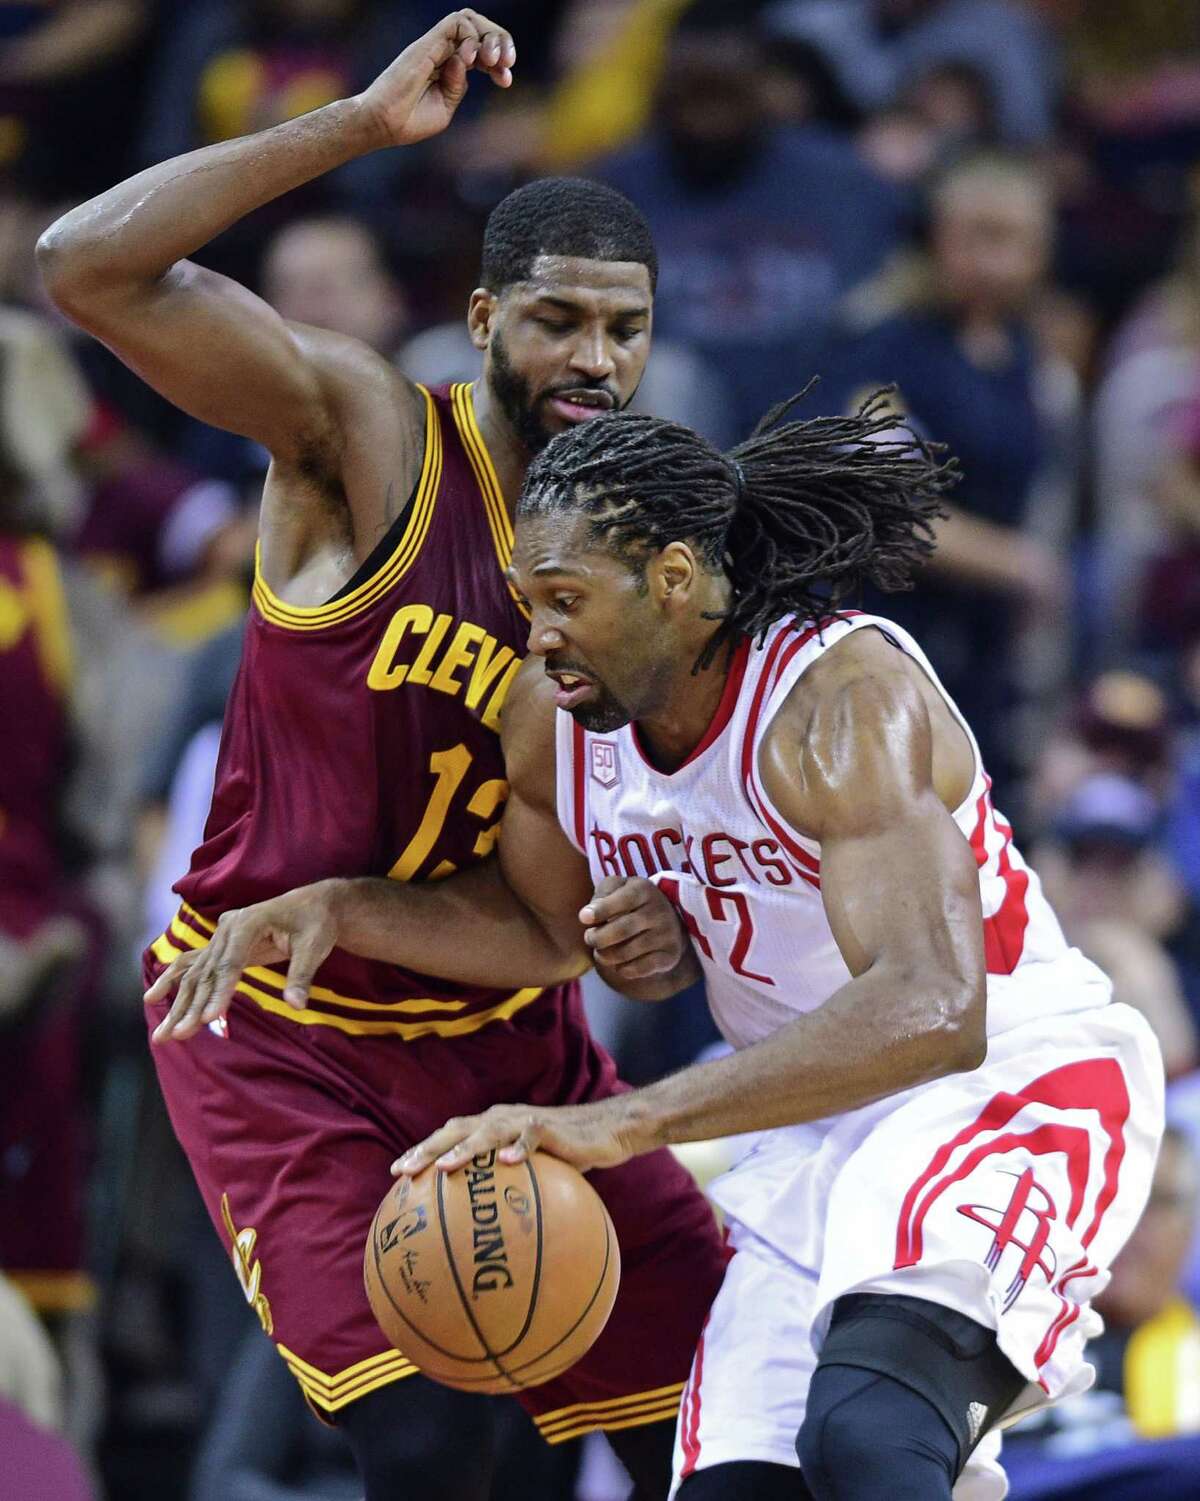 Houston Rockets forward Nene (42) drives on Cleveland Cavaliers forward Tristan Thompson (13) in the first half of an NBA basketball game Tuesday, Nov. 1, 2016, in Cleveland. (AP Photo/David Dermer)